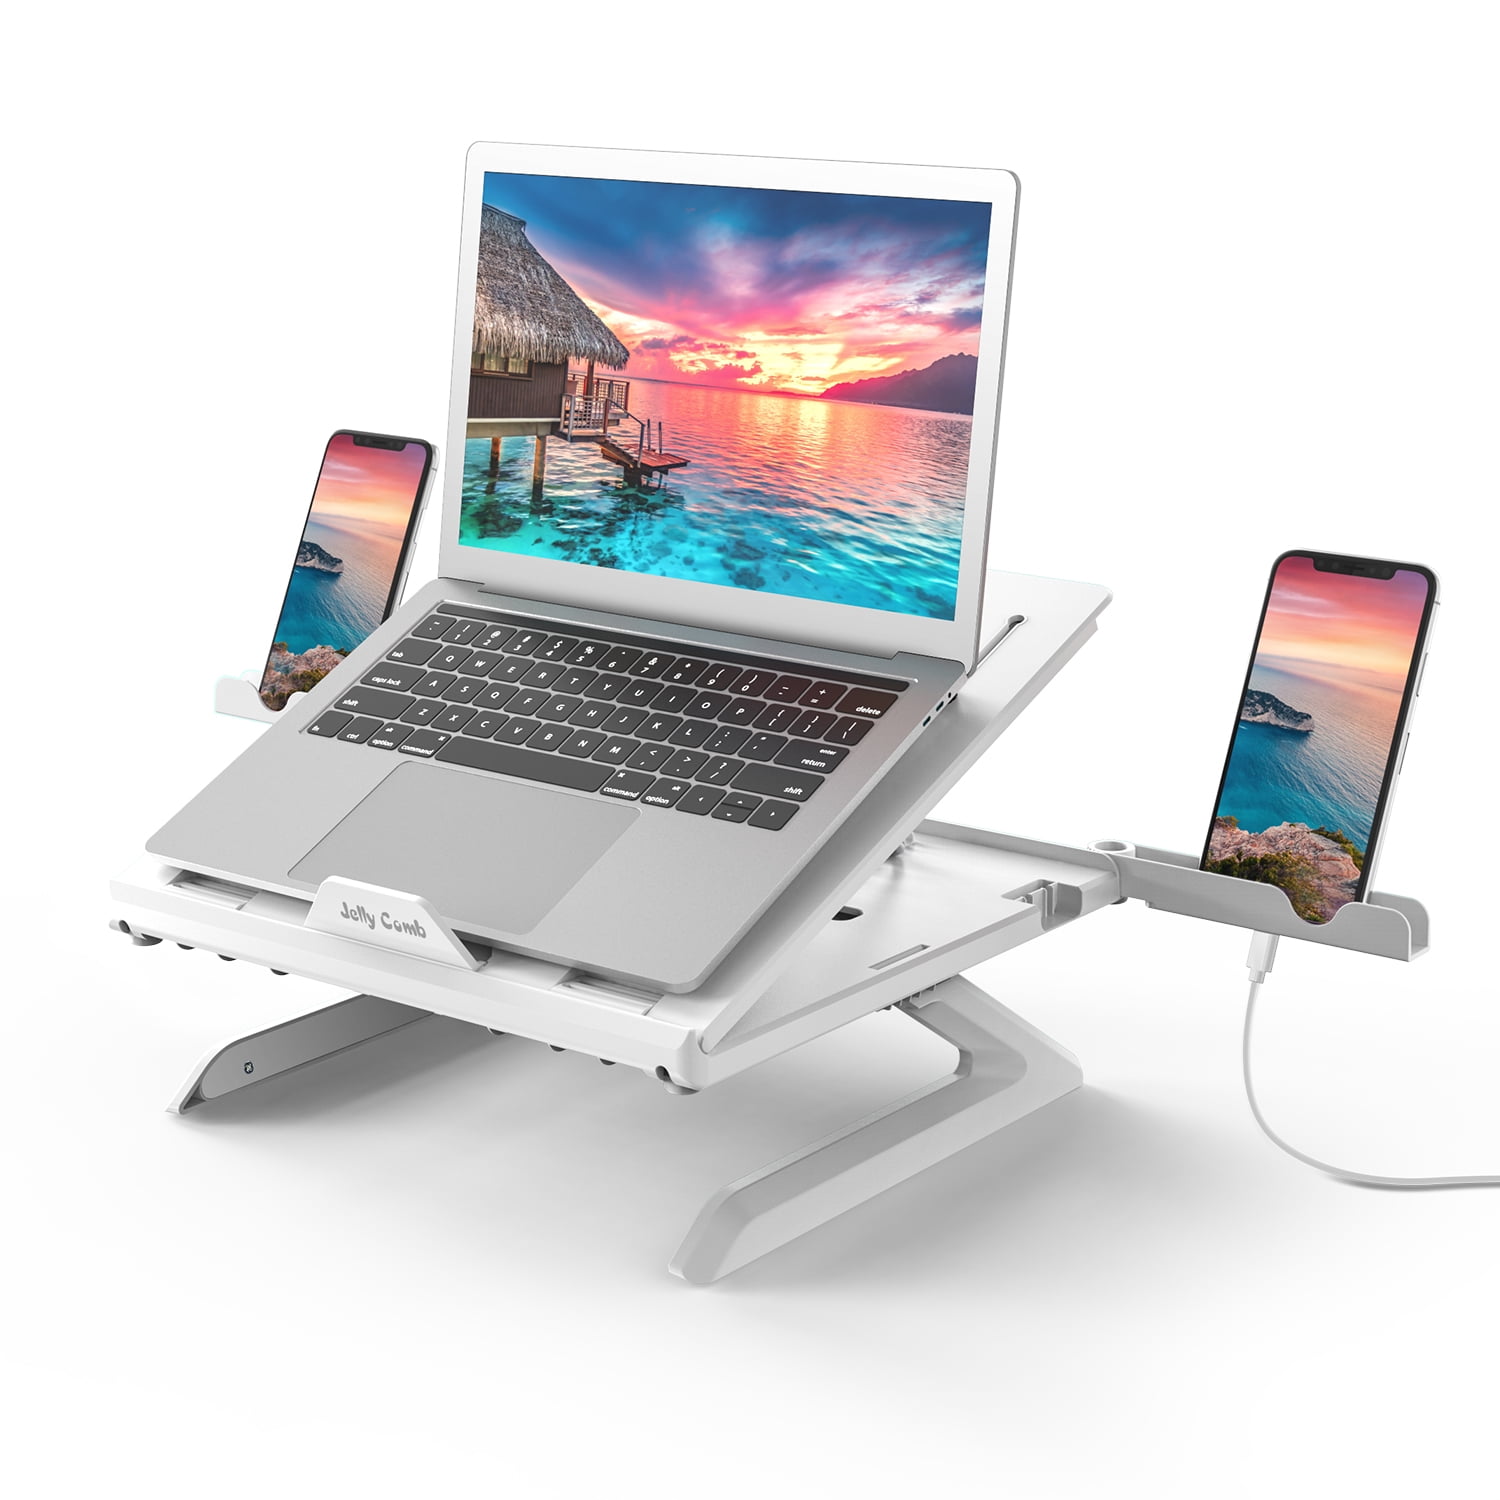 Tablet White Laptop Stand Book Jelly Comb Ergonomic Notebook Riser Desk 9-Level Adjustable with Foldable Legs Computer/Desktop Monitor Phone Holders and Cooling Design for Macbook 